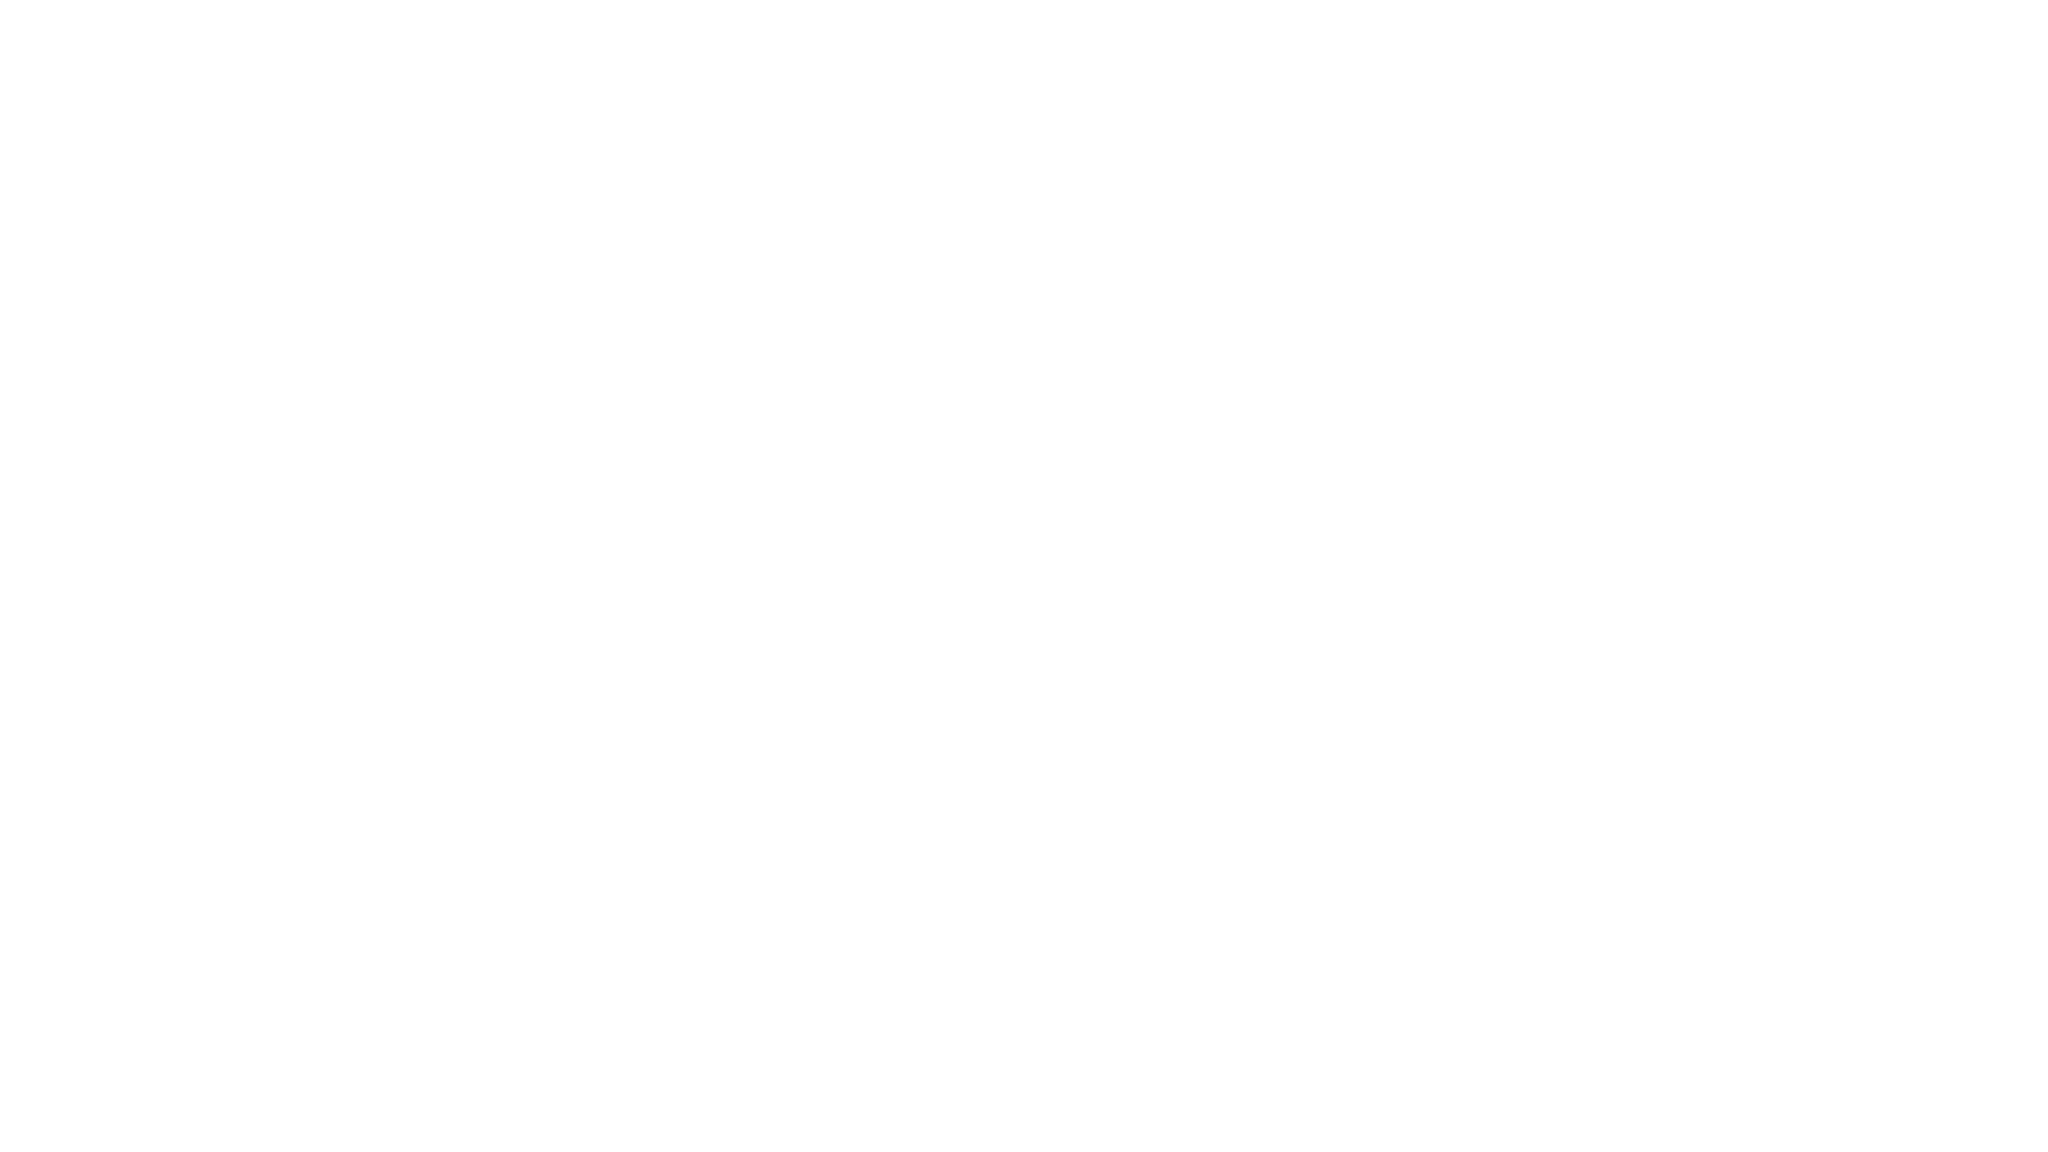 We Are Developers